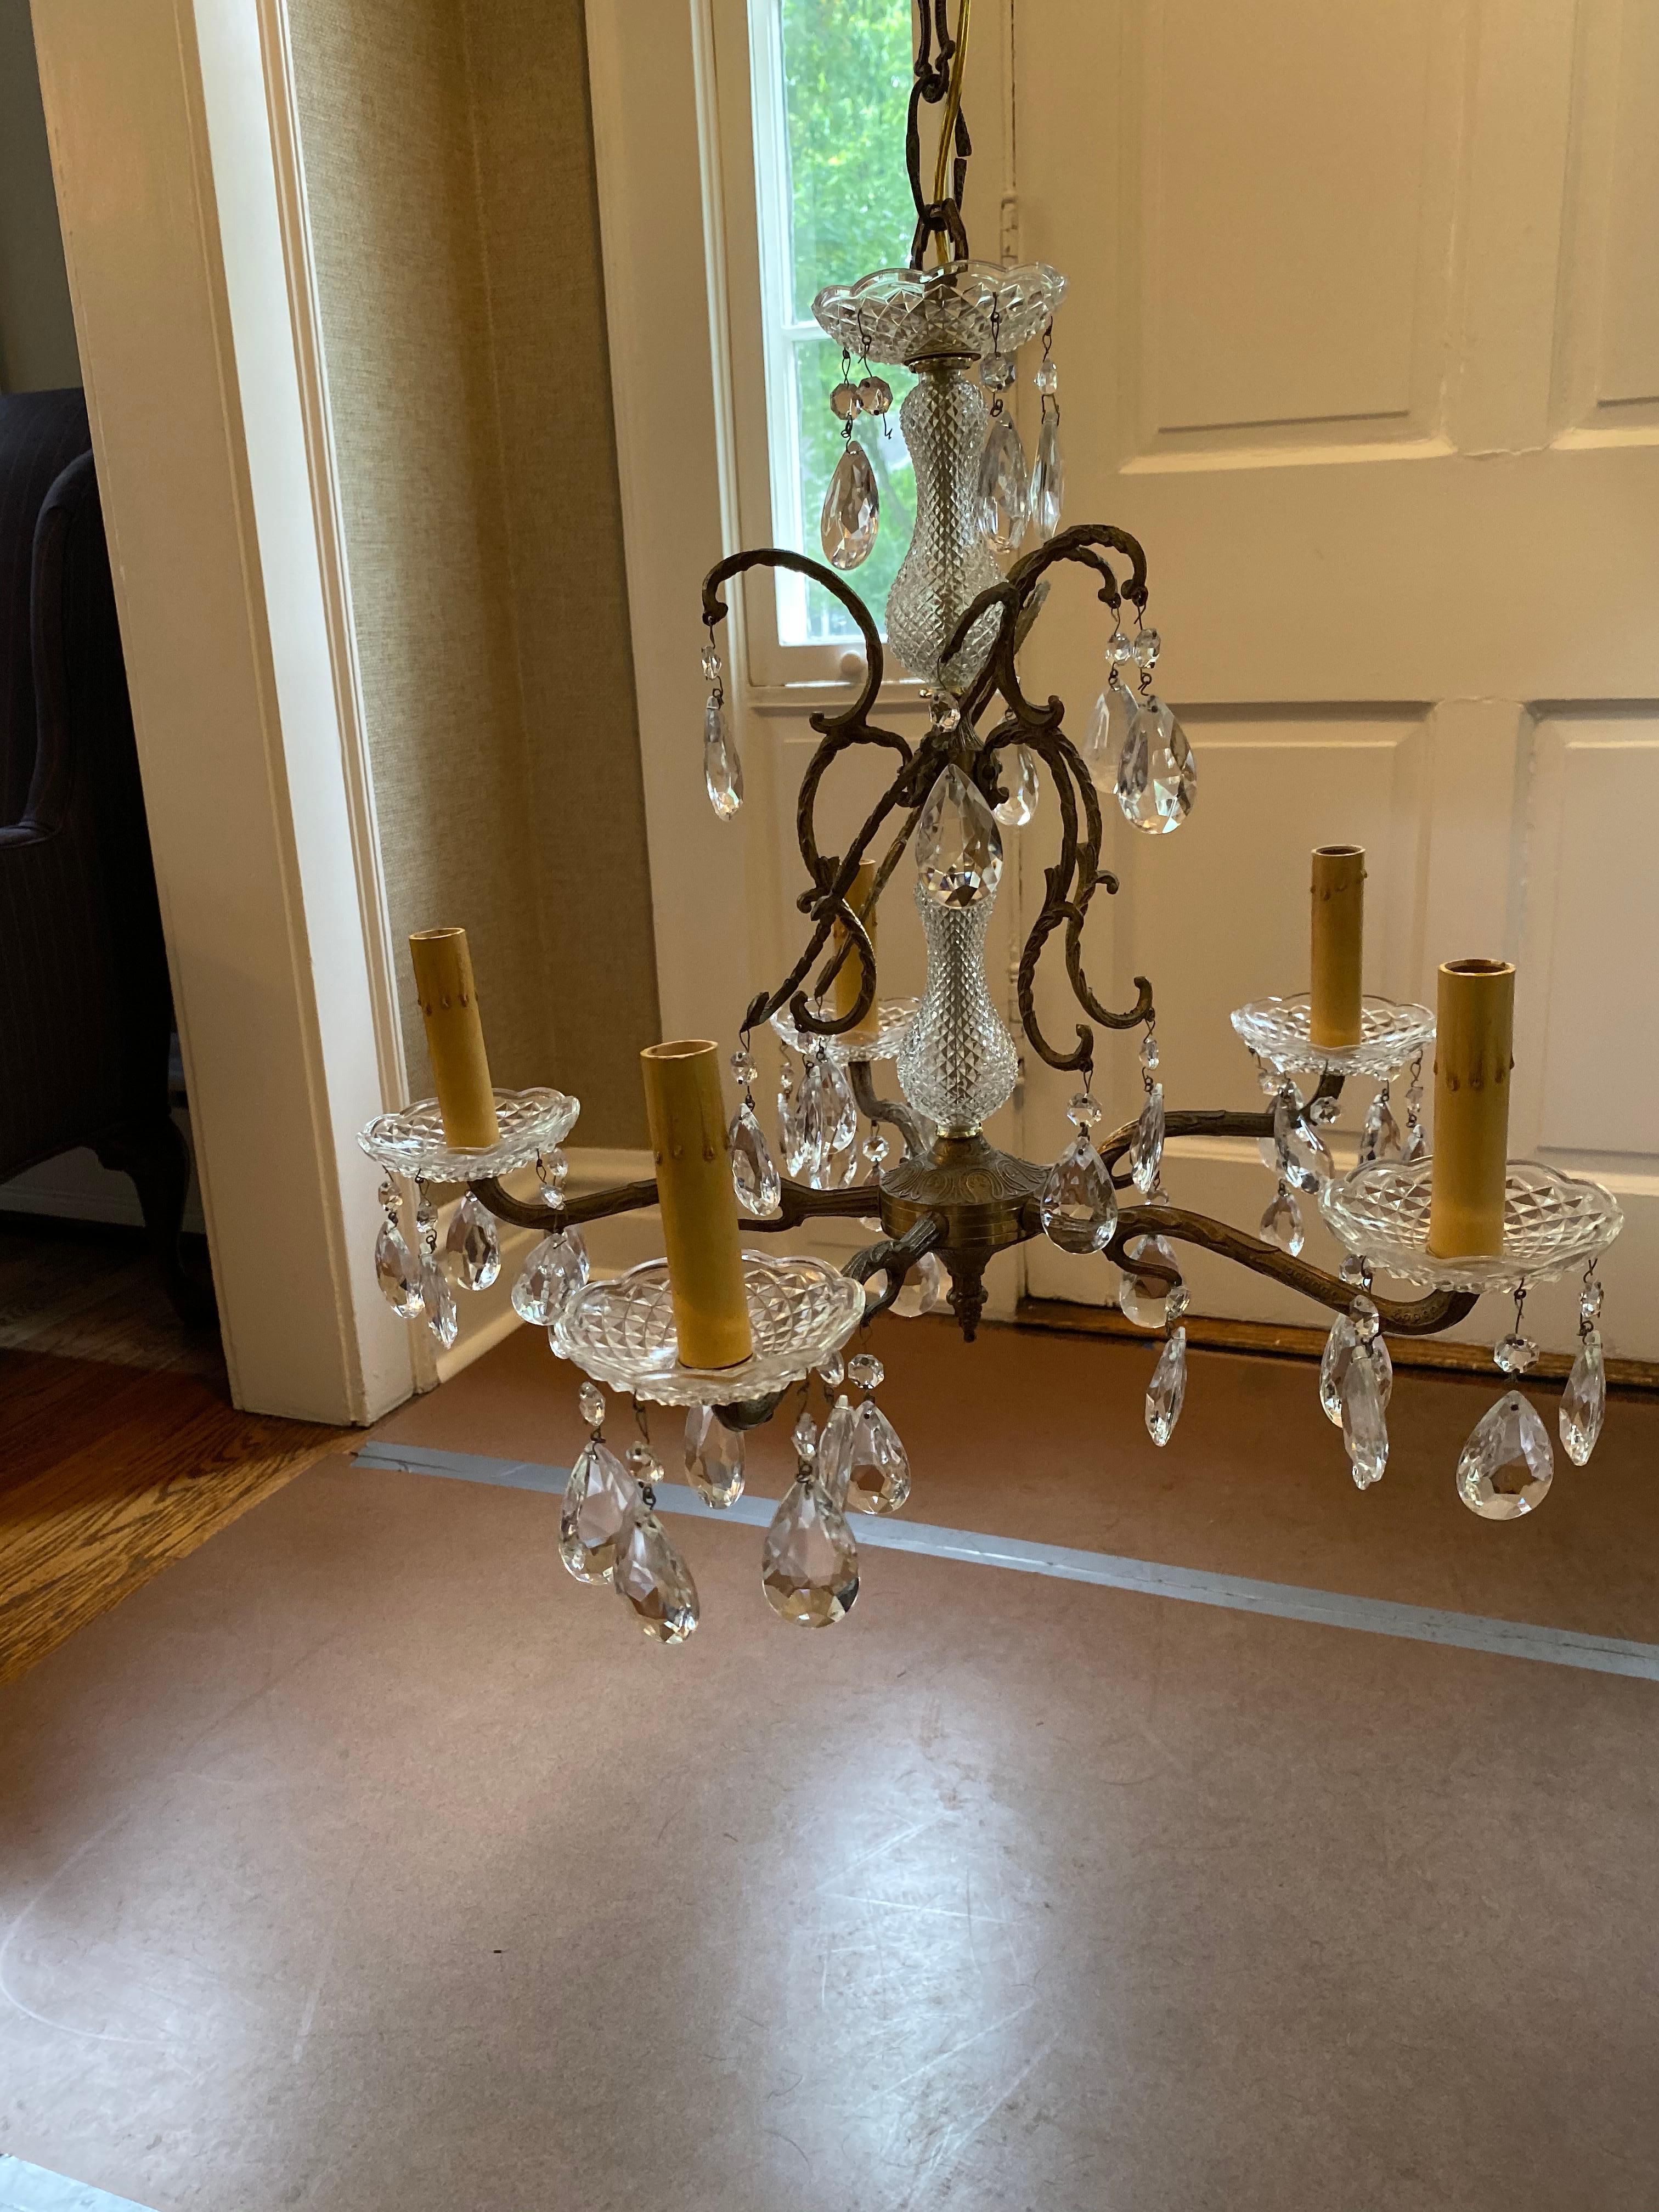 Vintage French Crystal and Bronze Chandelier from Marche Aux Puces, Paris For Sale 1